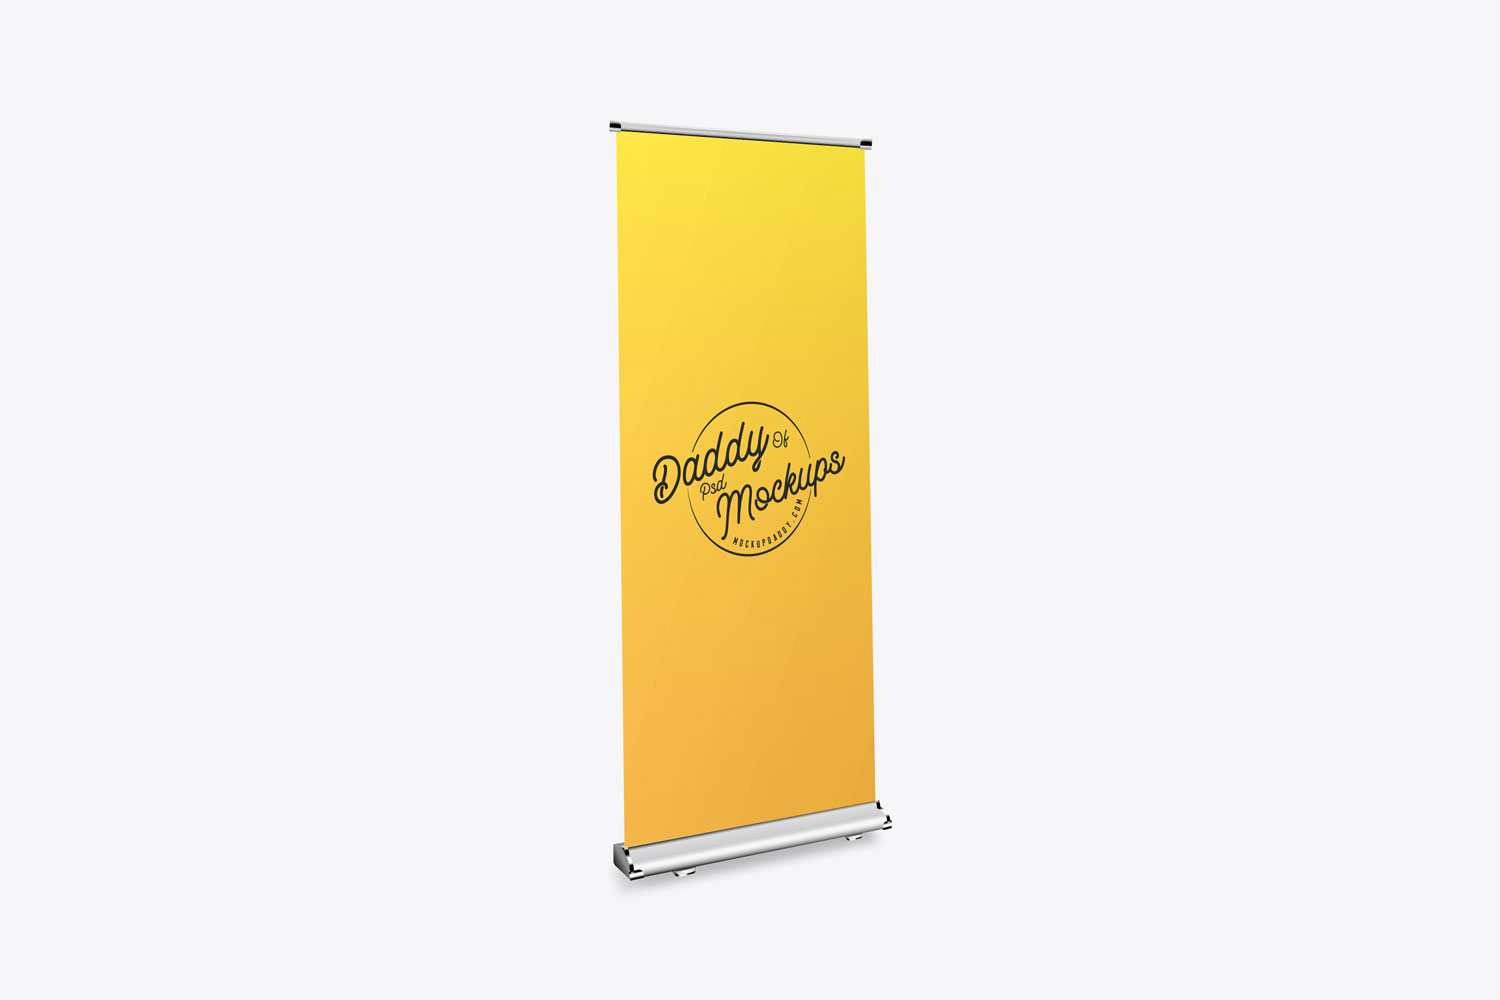 Digital roll-up banner mockup with geometric shapes and text